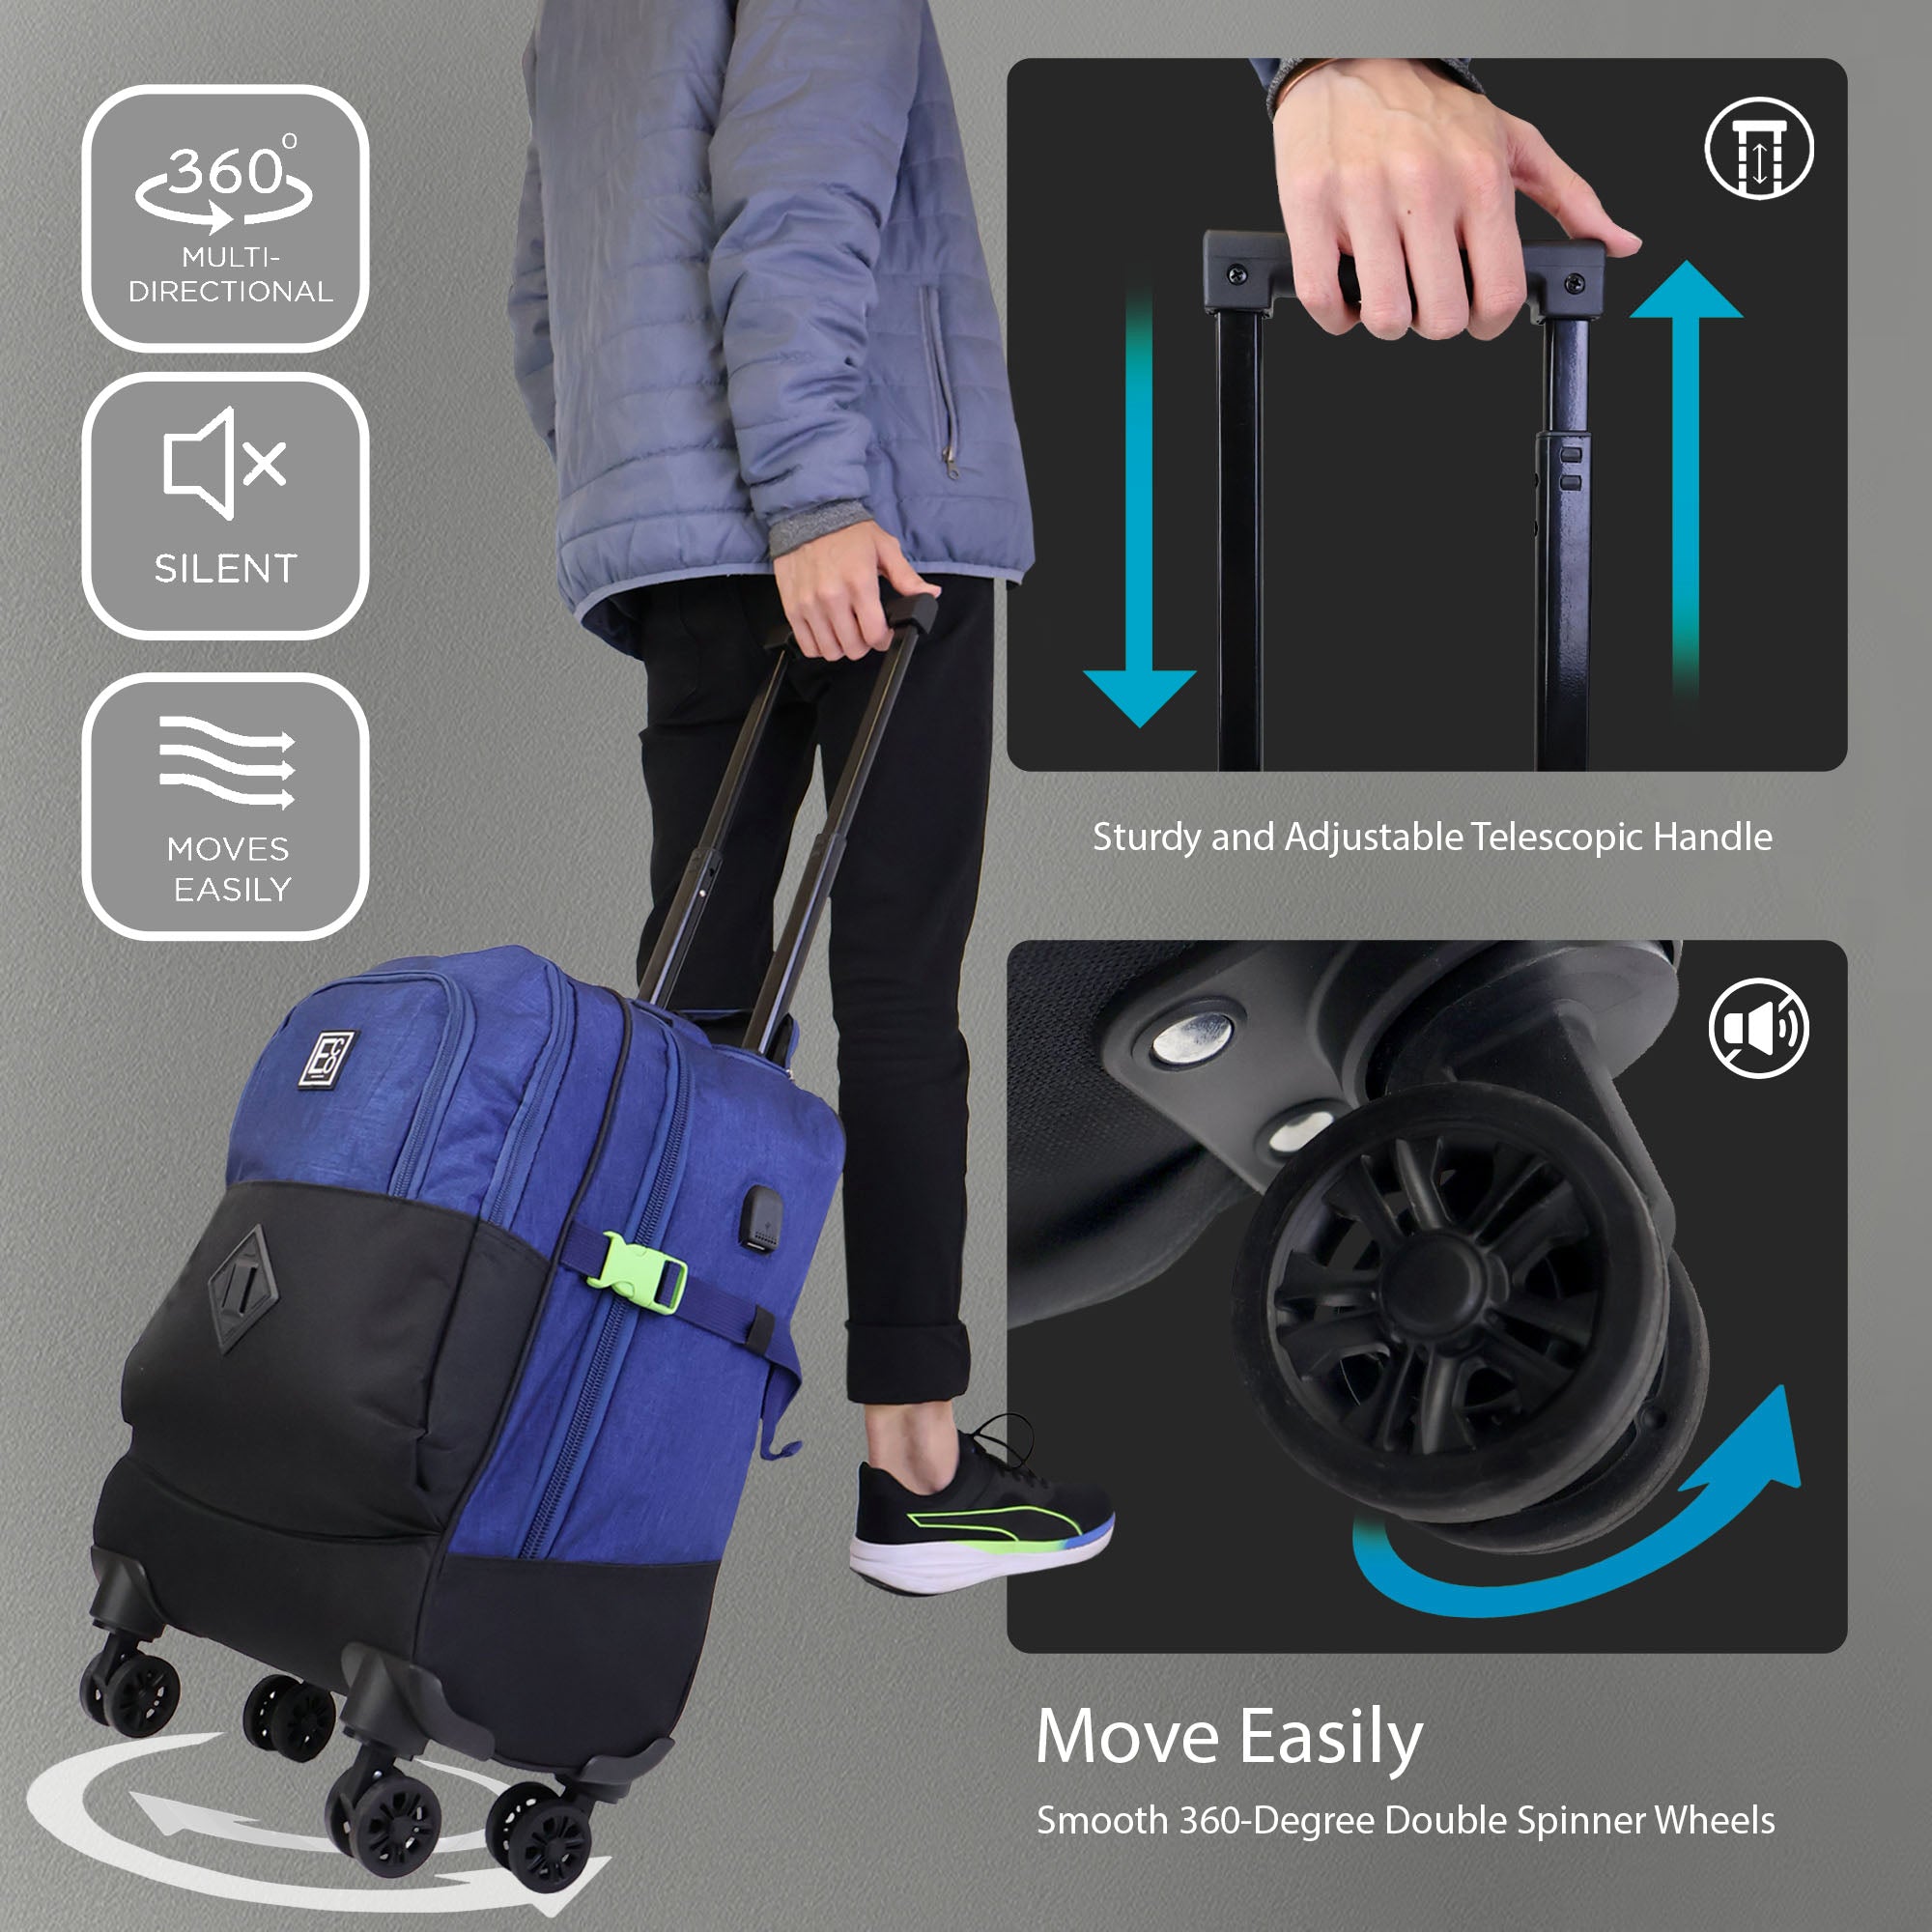 Spinner Trolley Backpack with Coolerbag Compart and USB Port